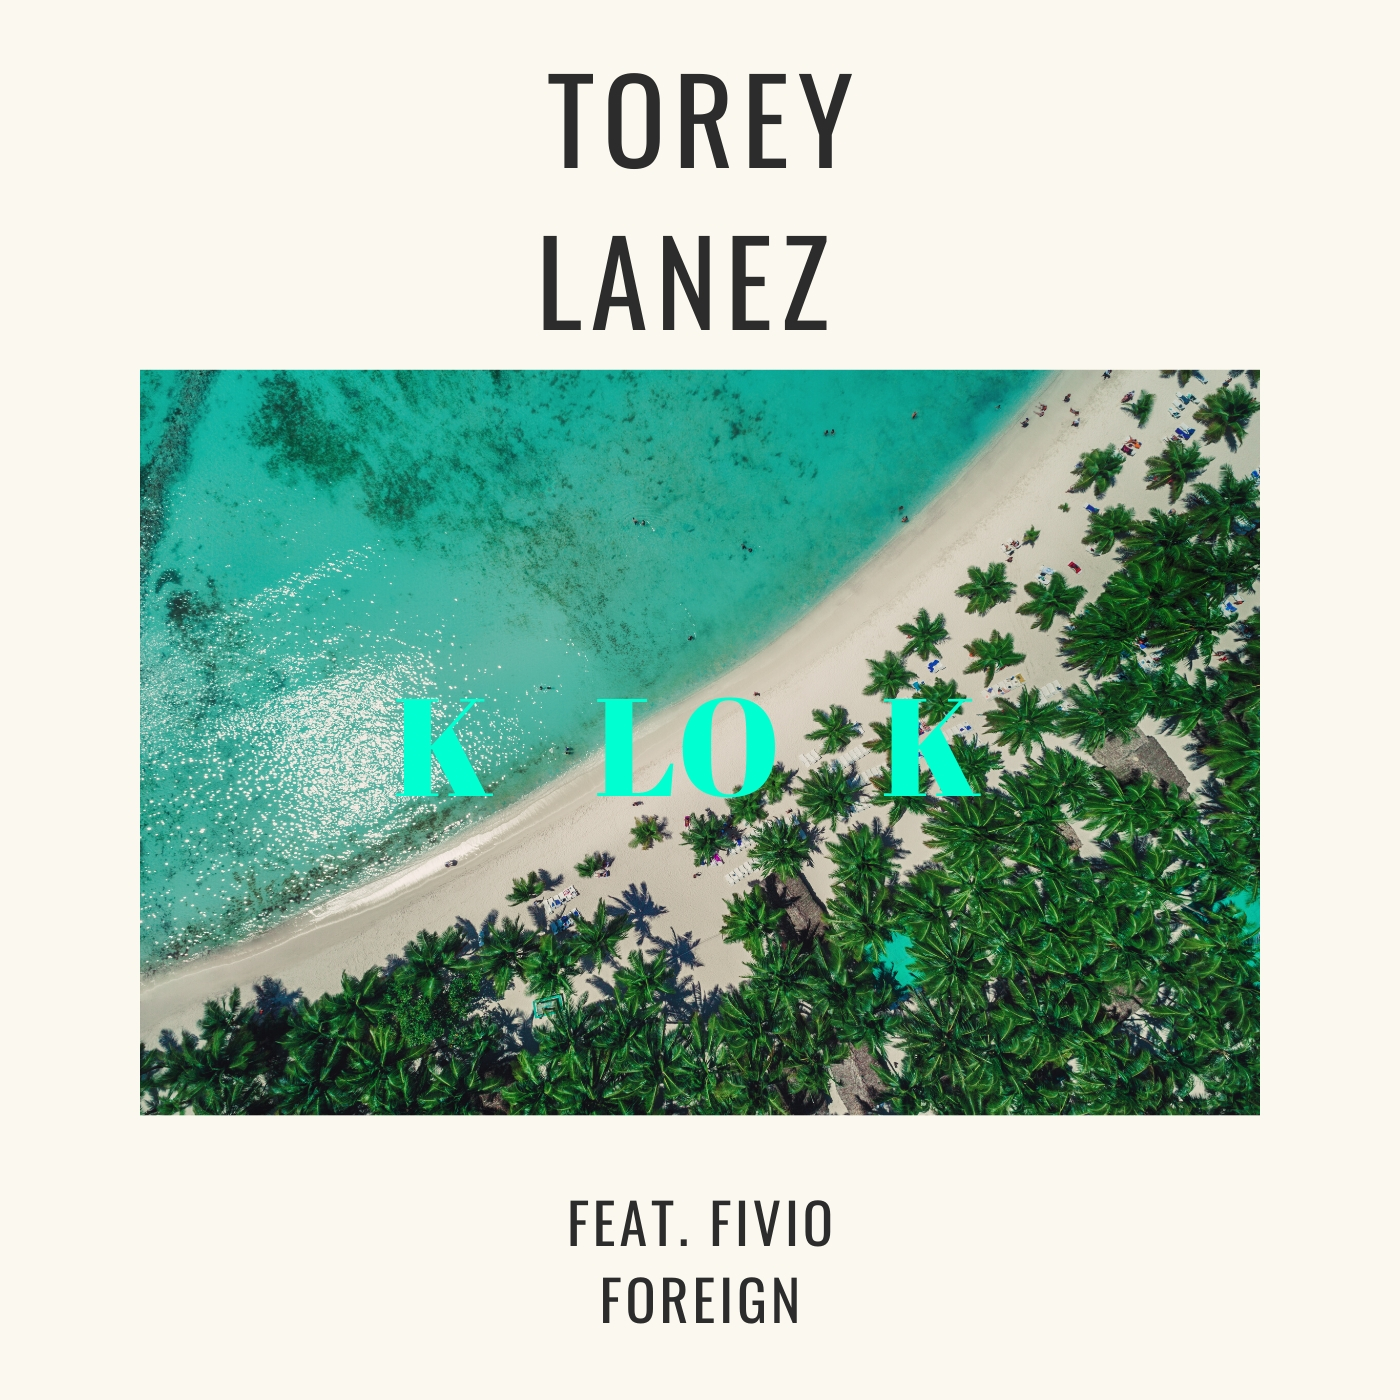 Art for K Lo K (Dirty) by Torey Lanez feat. Fivio Foreign